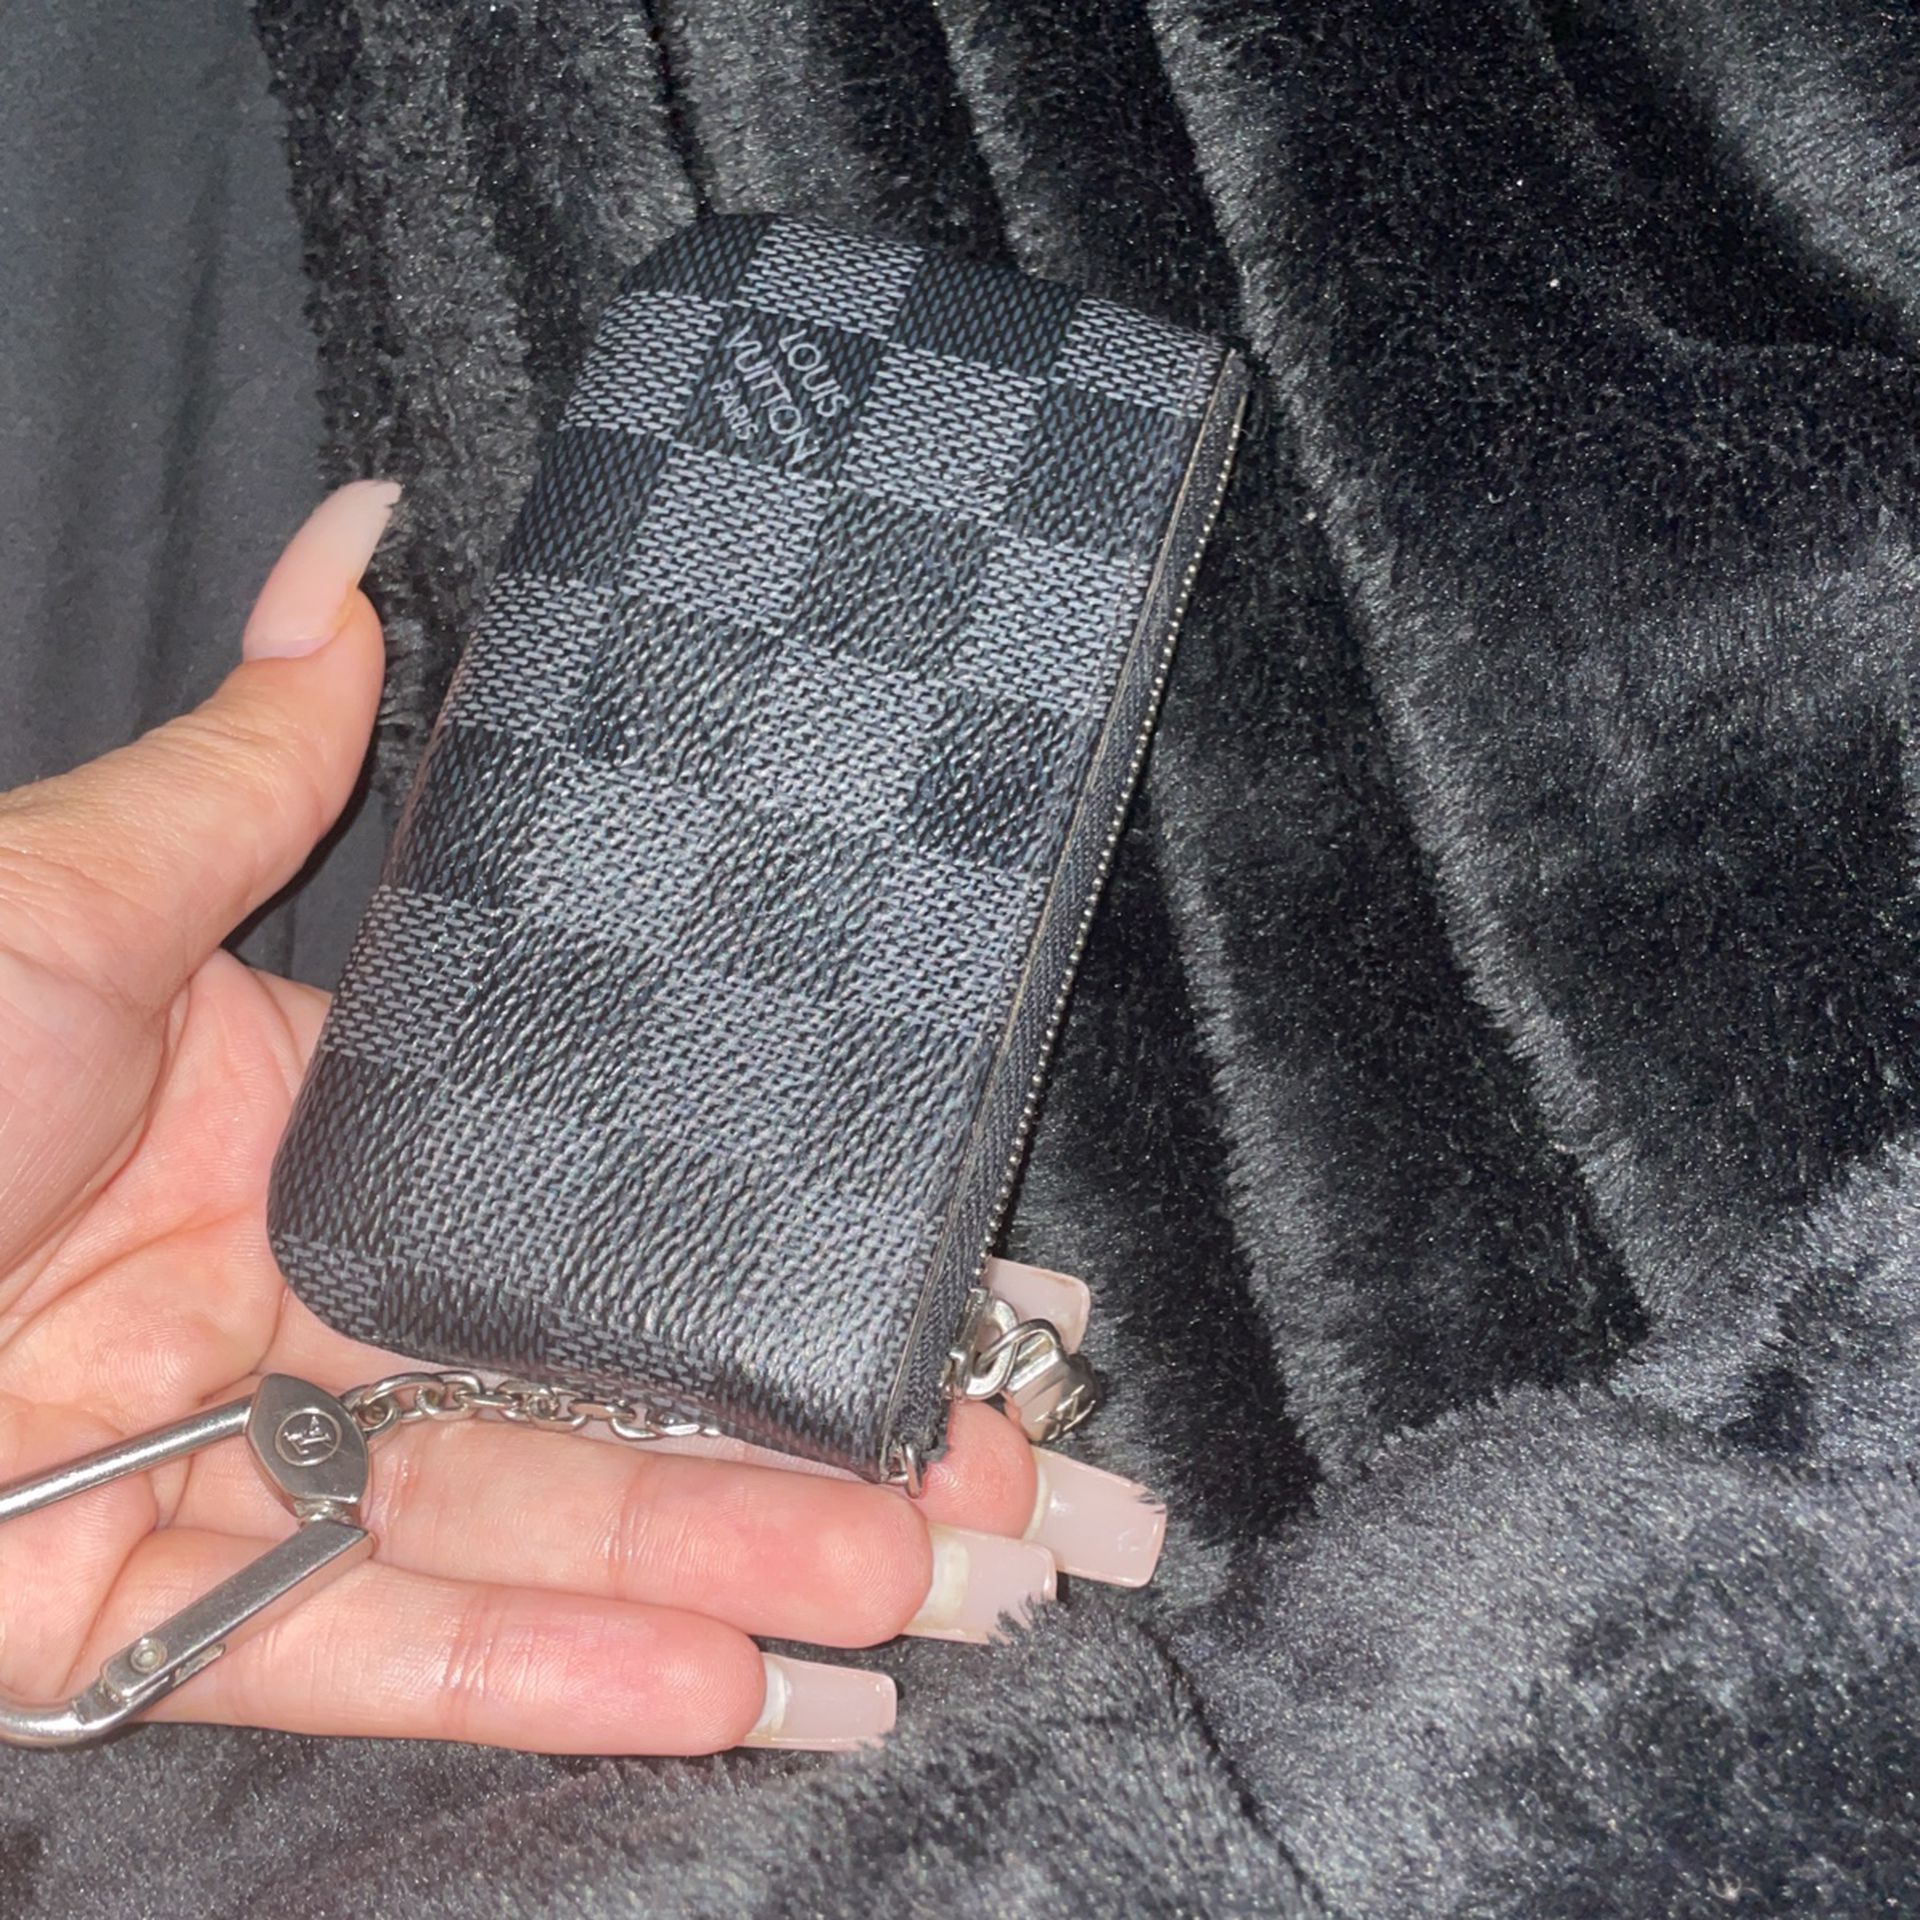 Louis Vuitton Keychain Wallet for Sale in Sea Cliff, NY - OfferUp